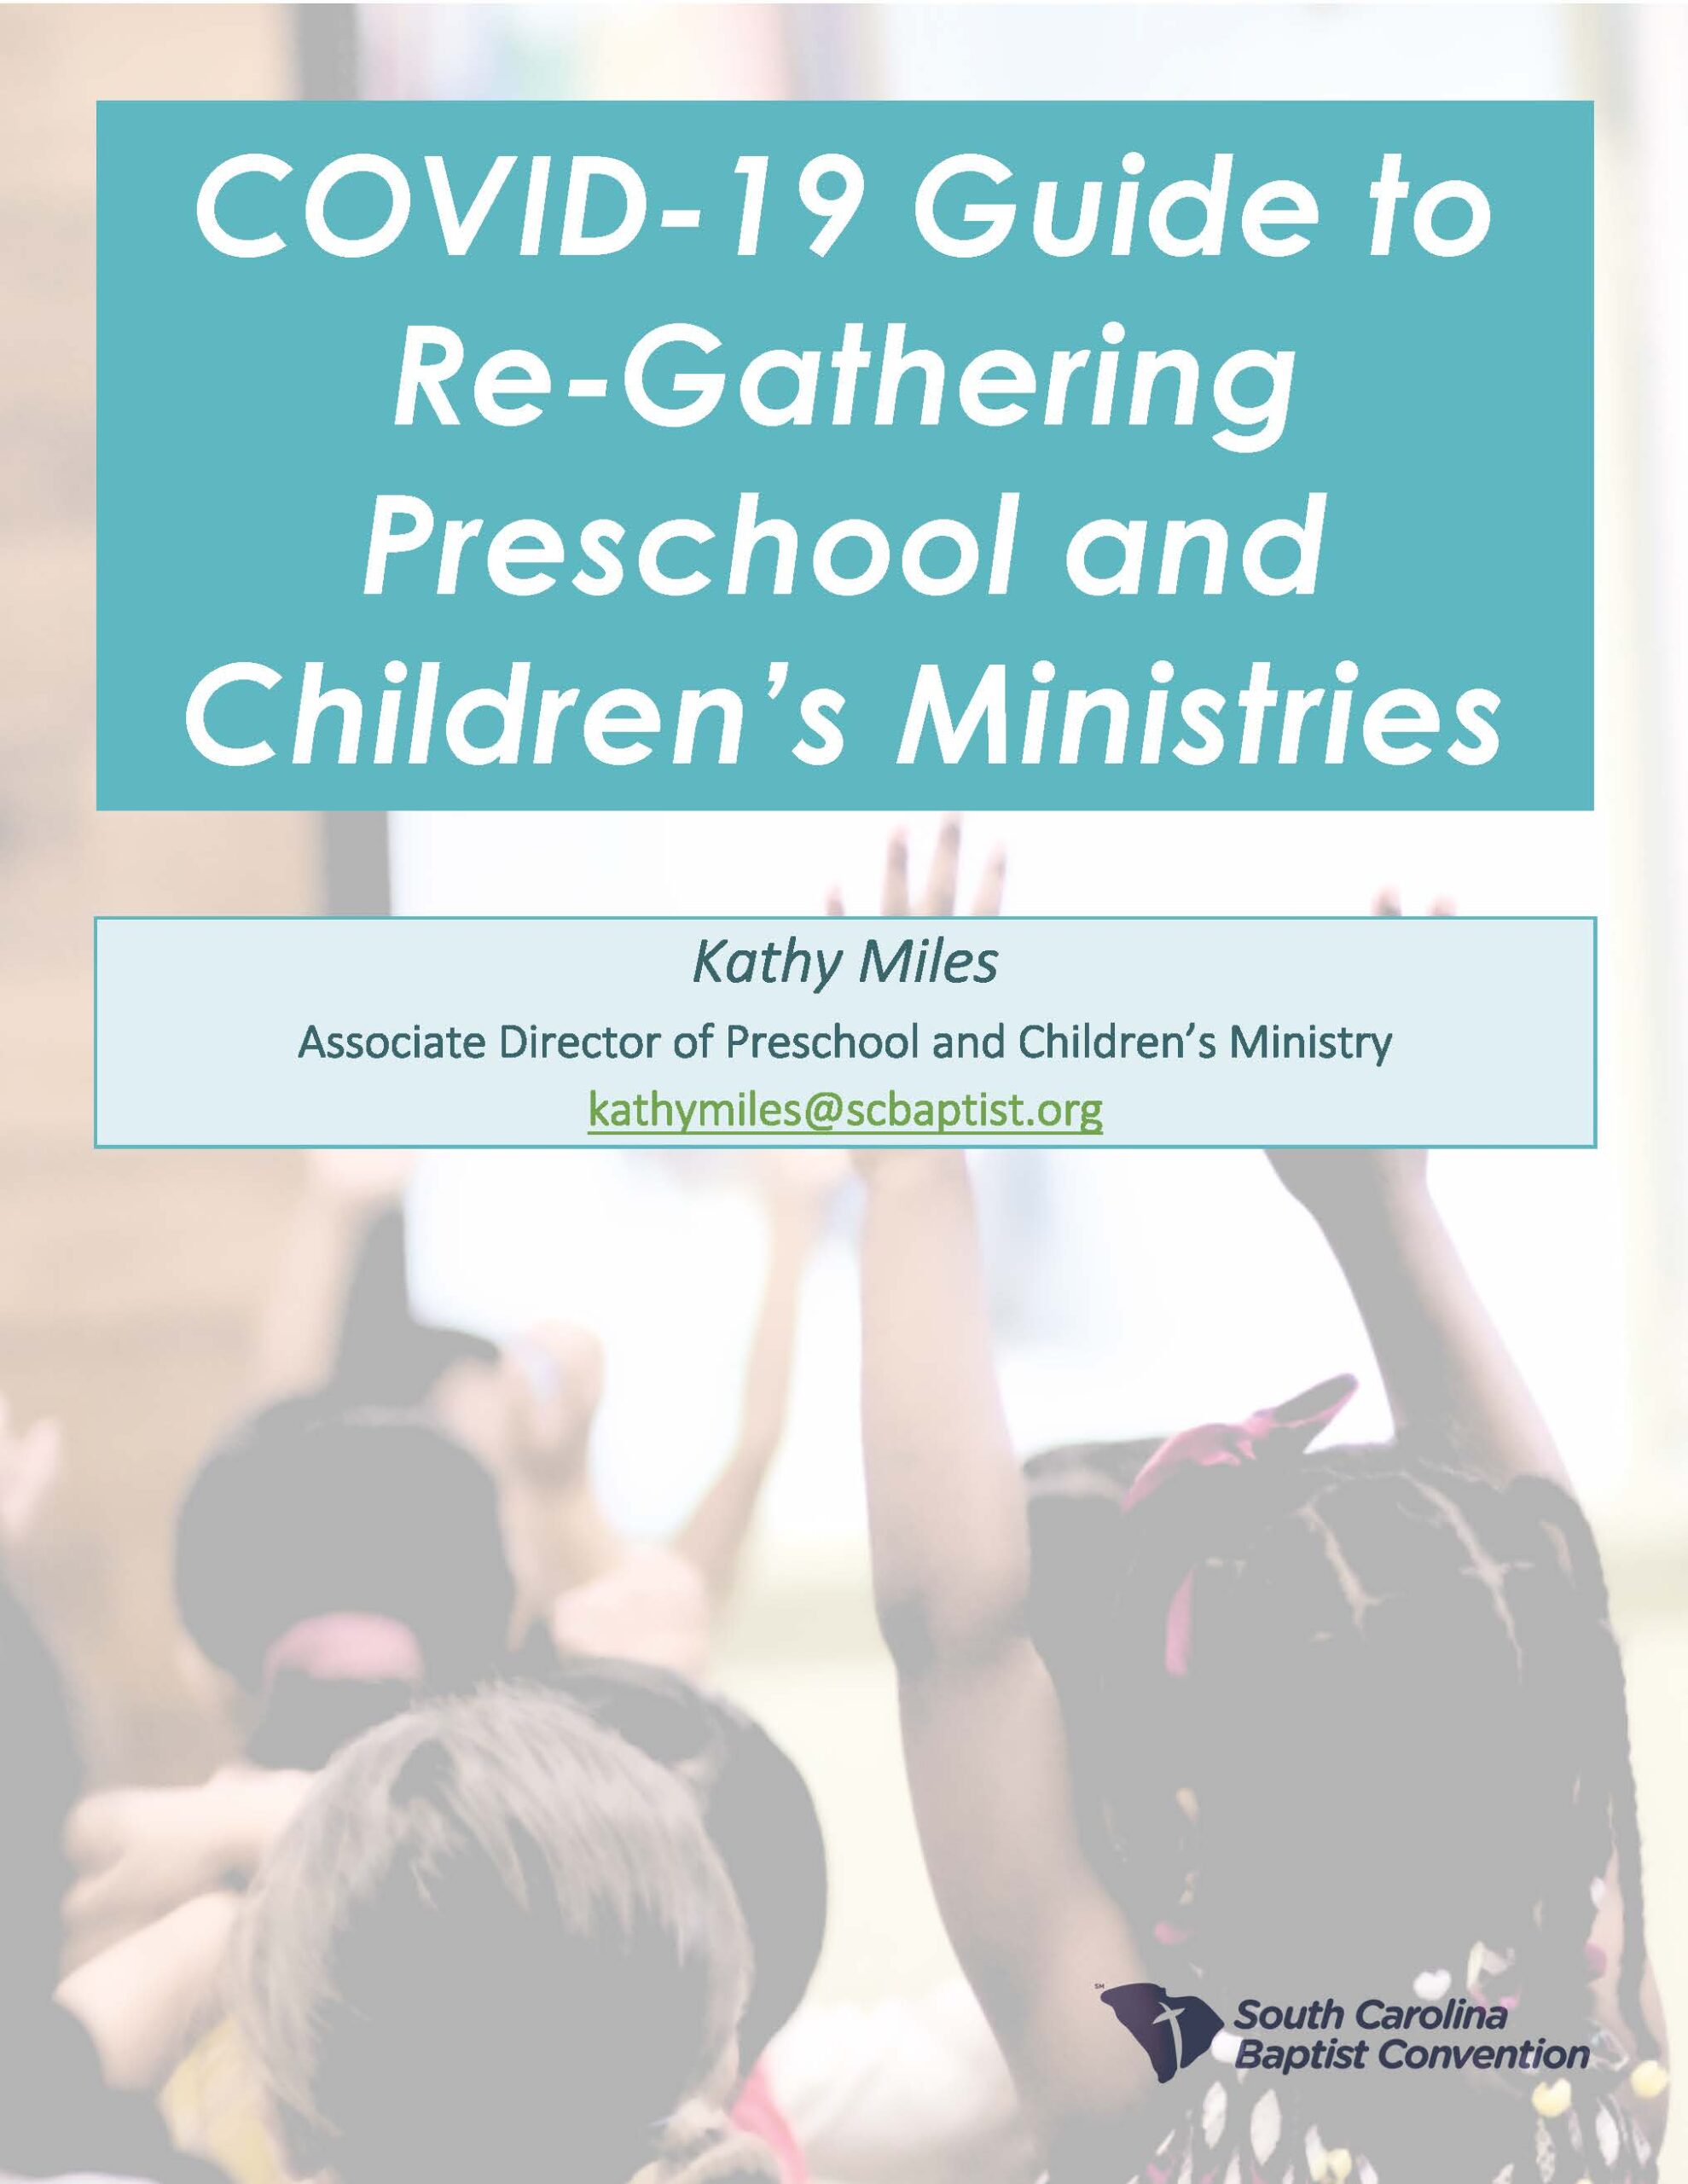 Guide to Re-Gathering Preschool and Children’s Ministries